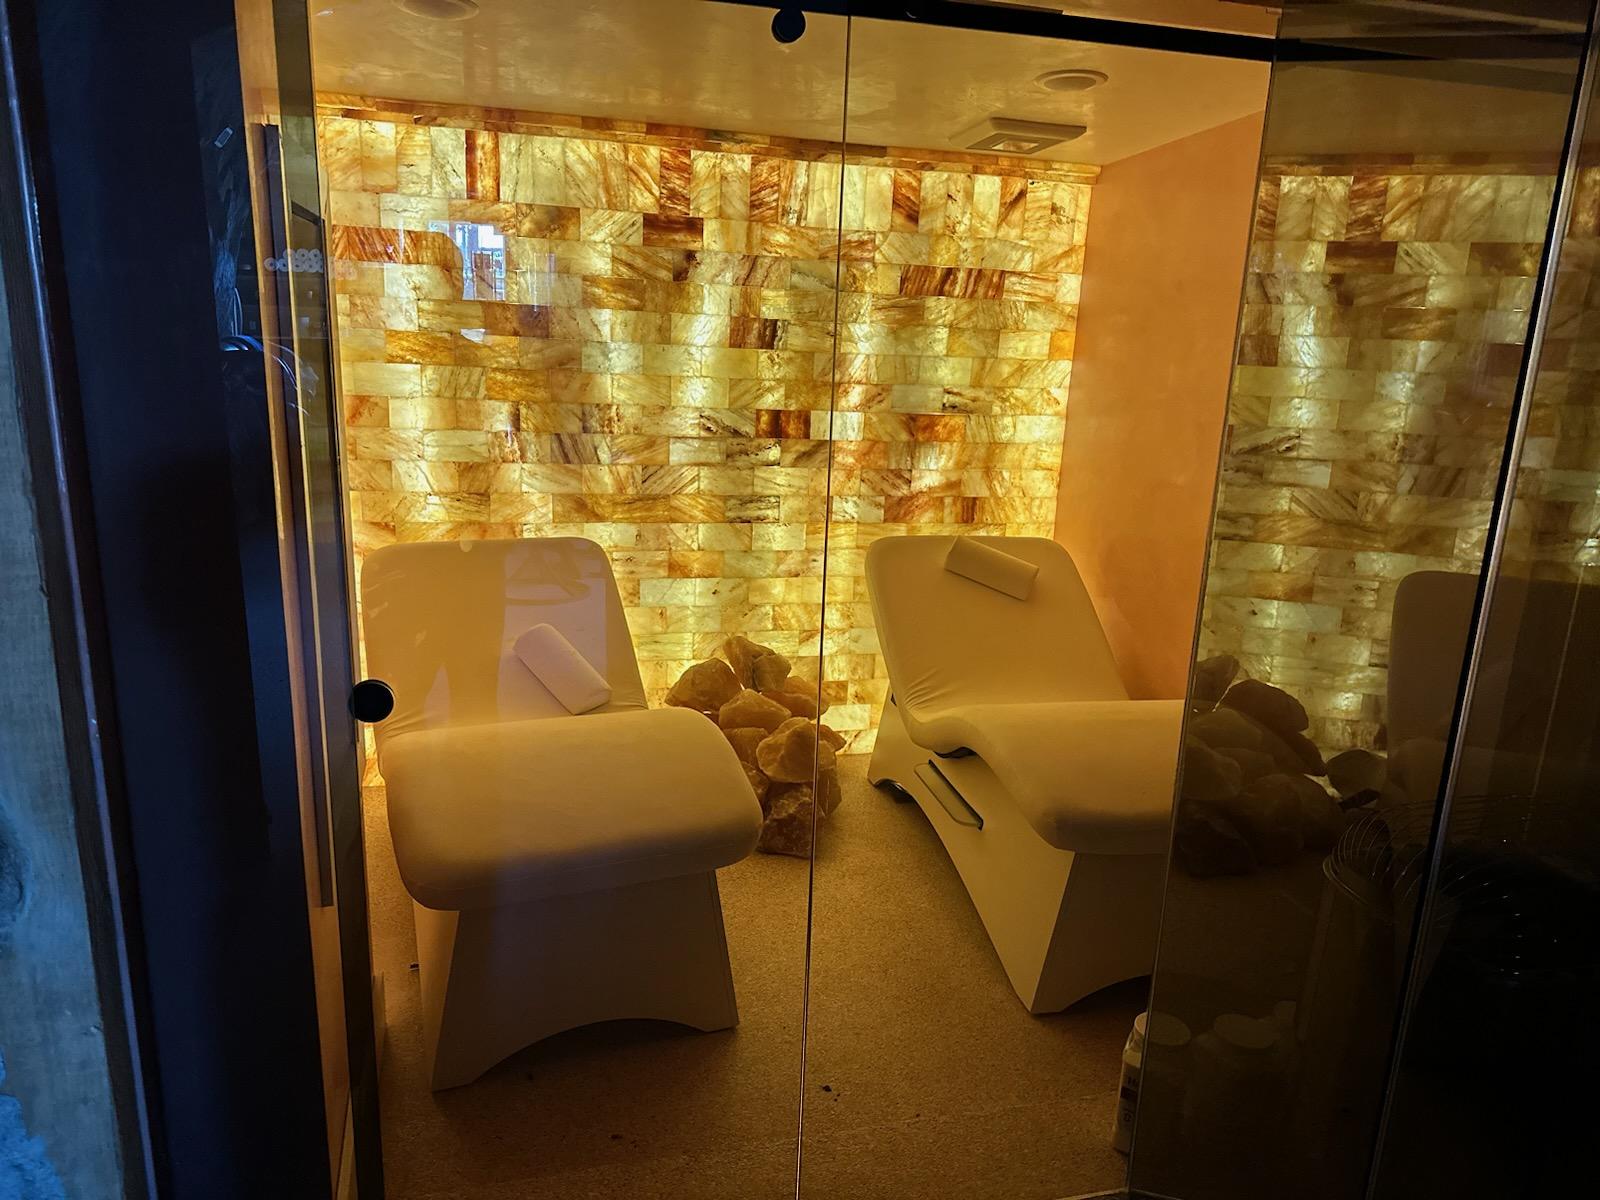 A Salt Room At A Private Home Residence With Two Lounge Chairs And A Himalayan Salt Brick Wall.